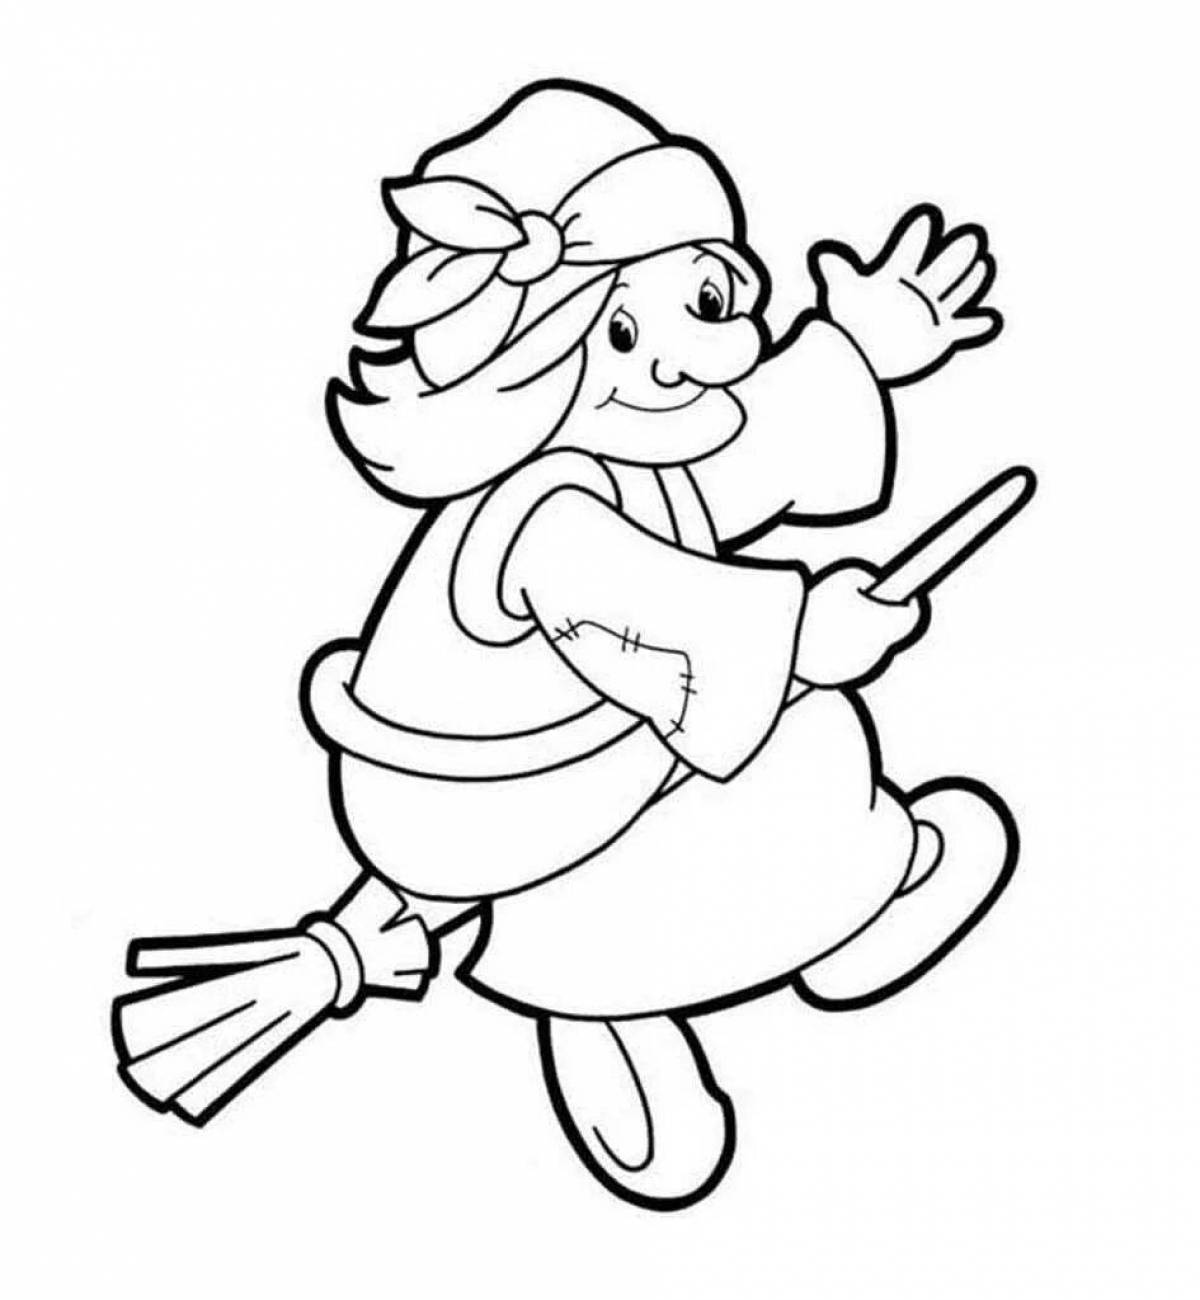 Exotic coloring pages heroes of fairy tales